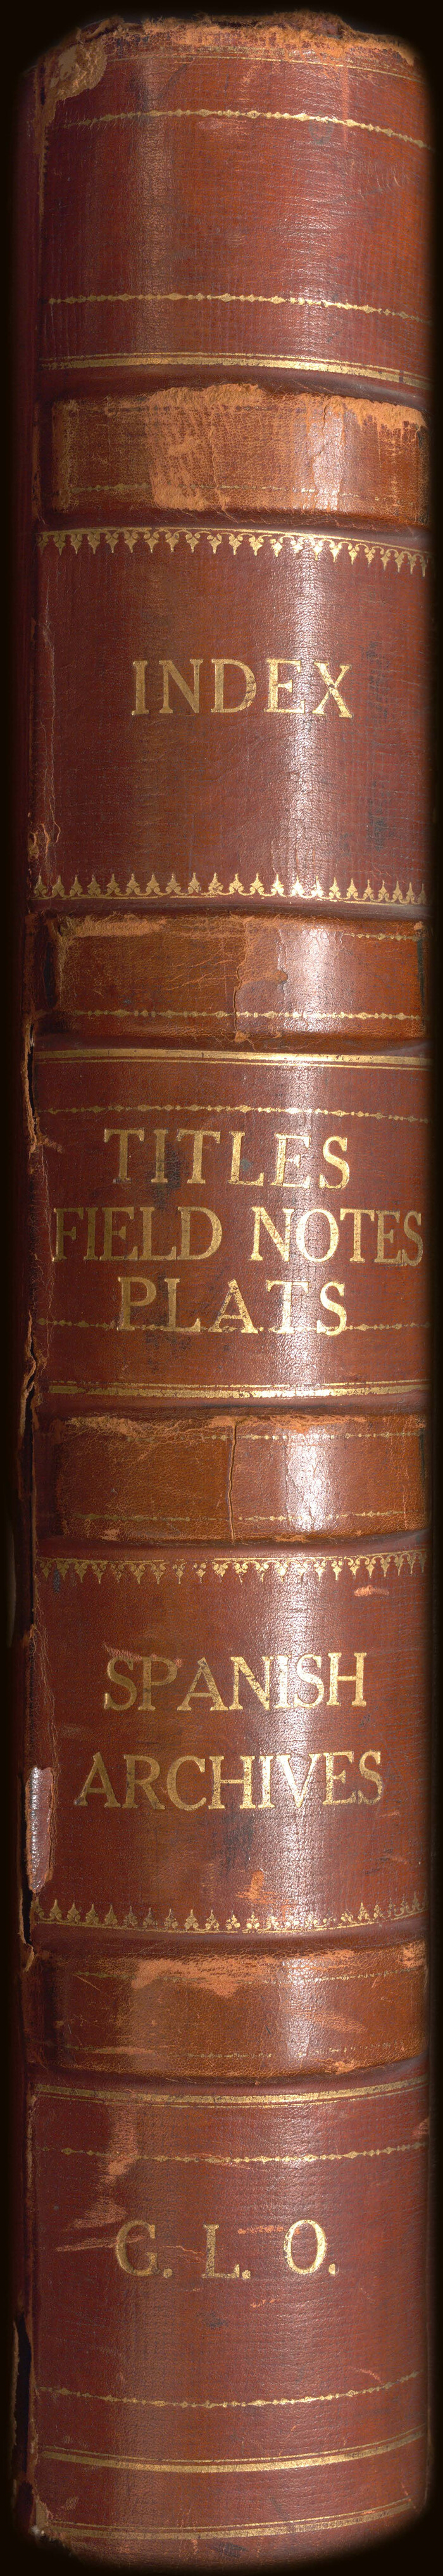 94534, Index to Titles, Field Notes, Plats: Spanish Archives, Historical Volumes